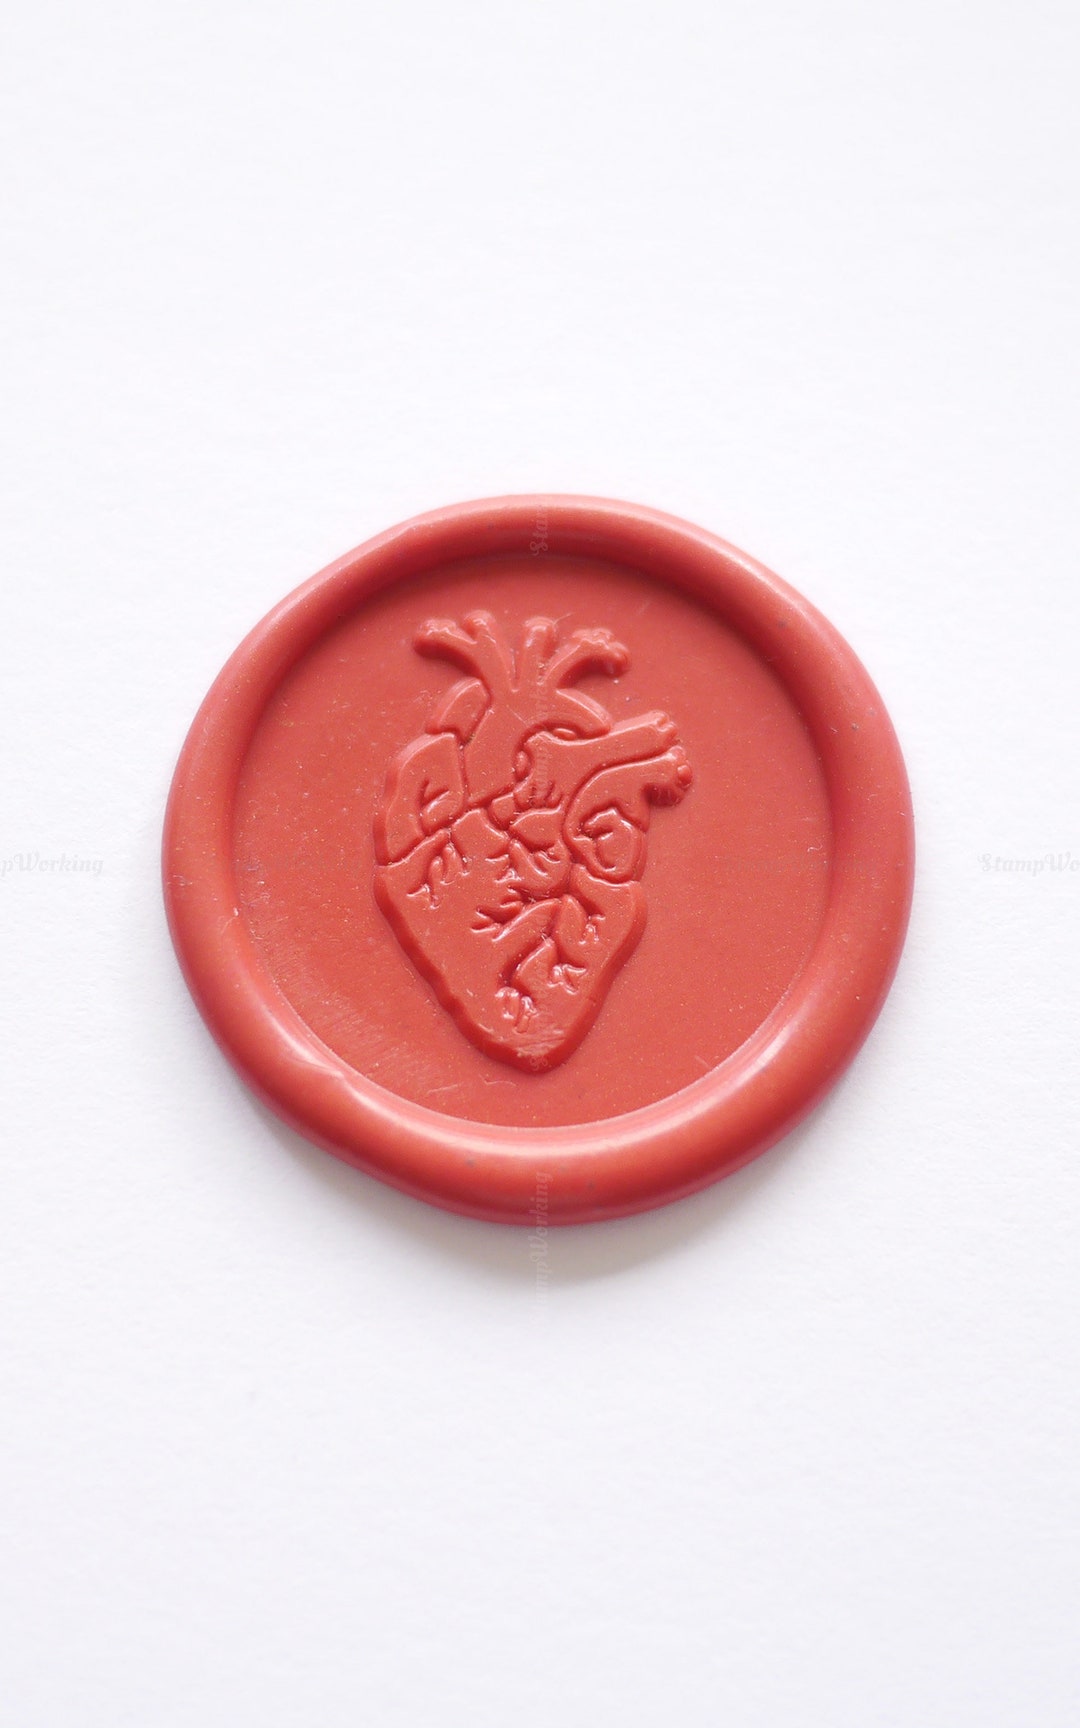 1PC Egyptian Cat Wax Seal Stamp 30mm Diameter Wax Stamps for